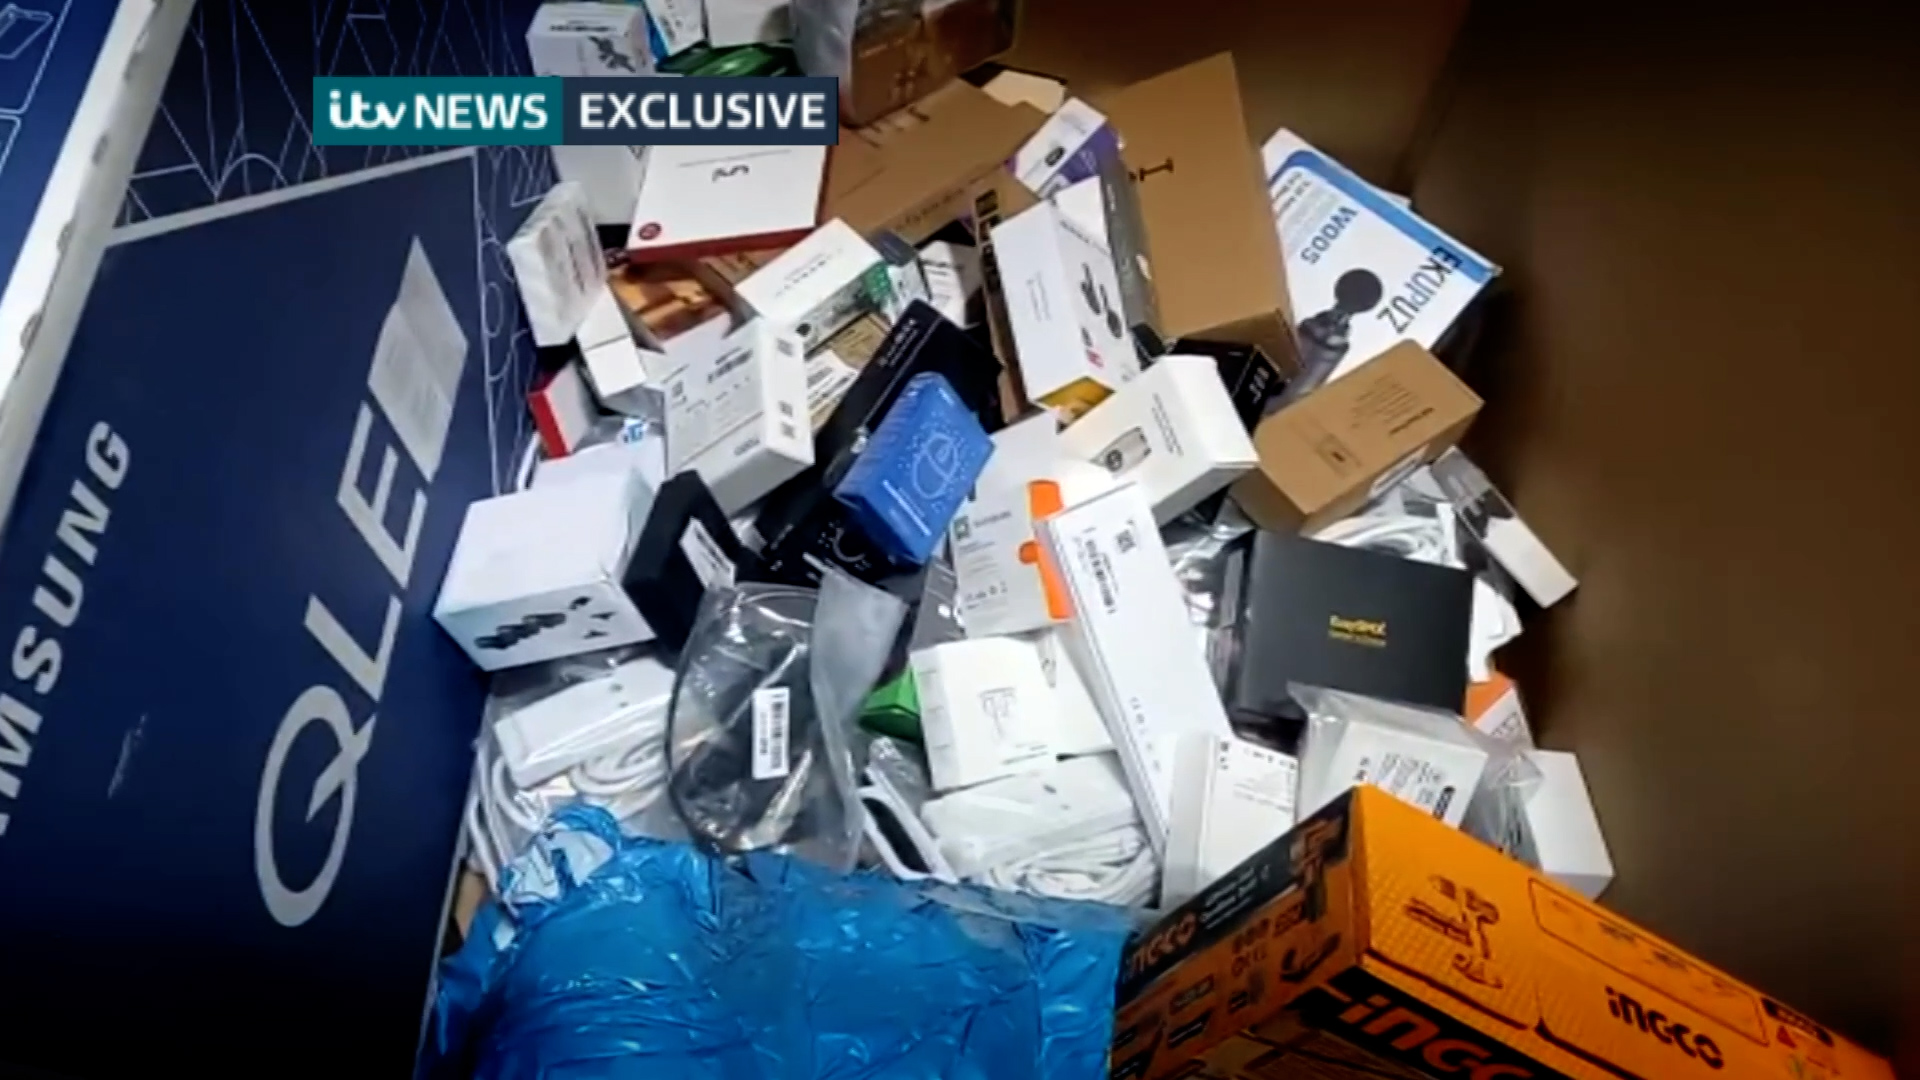 Investigation uncovers Amazon UK warehouse destroying millions of unsold stock items